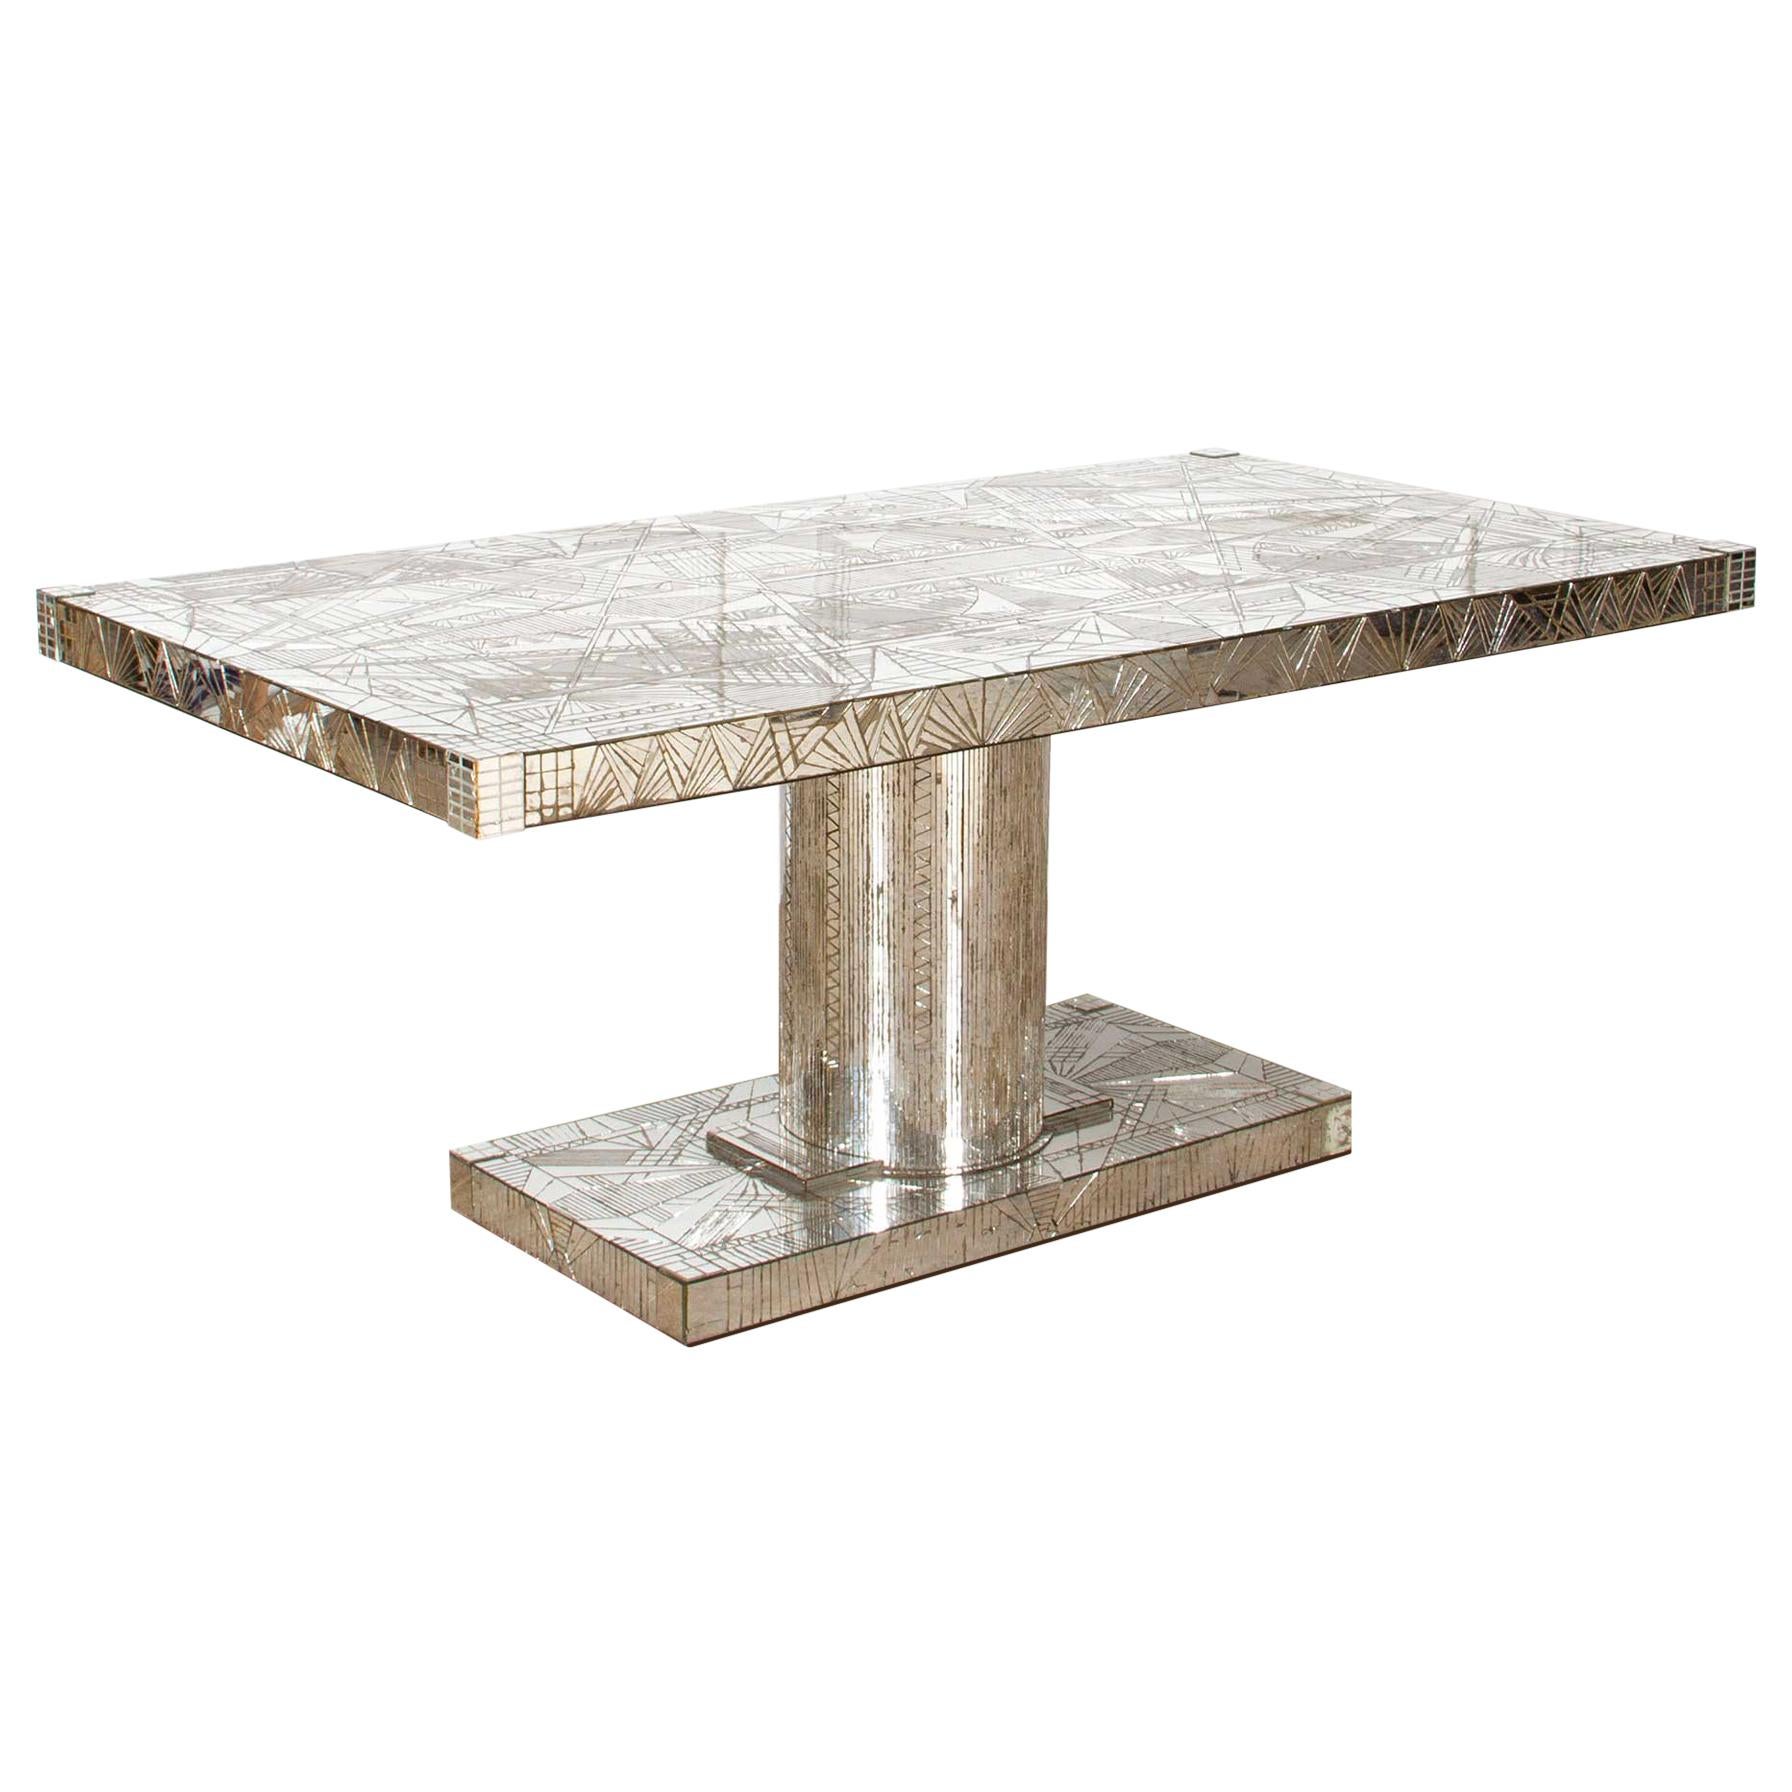 Mirrored Mosaic Dining Table by Daniel Clement